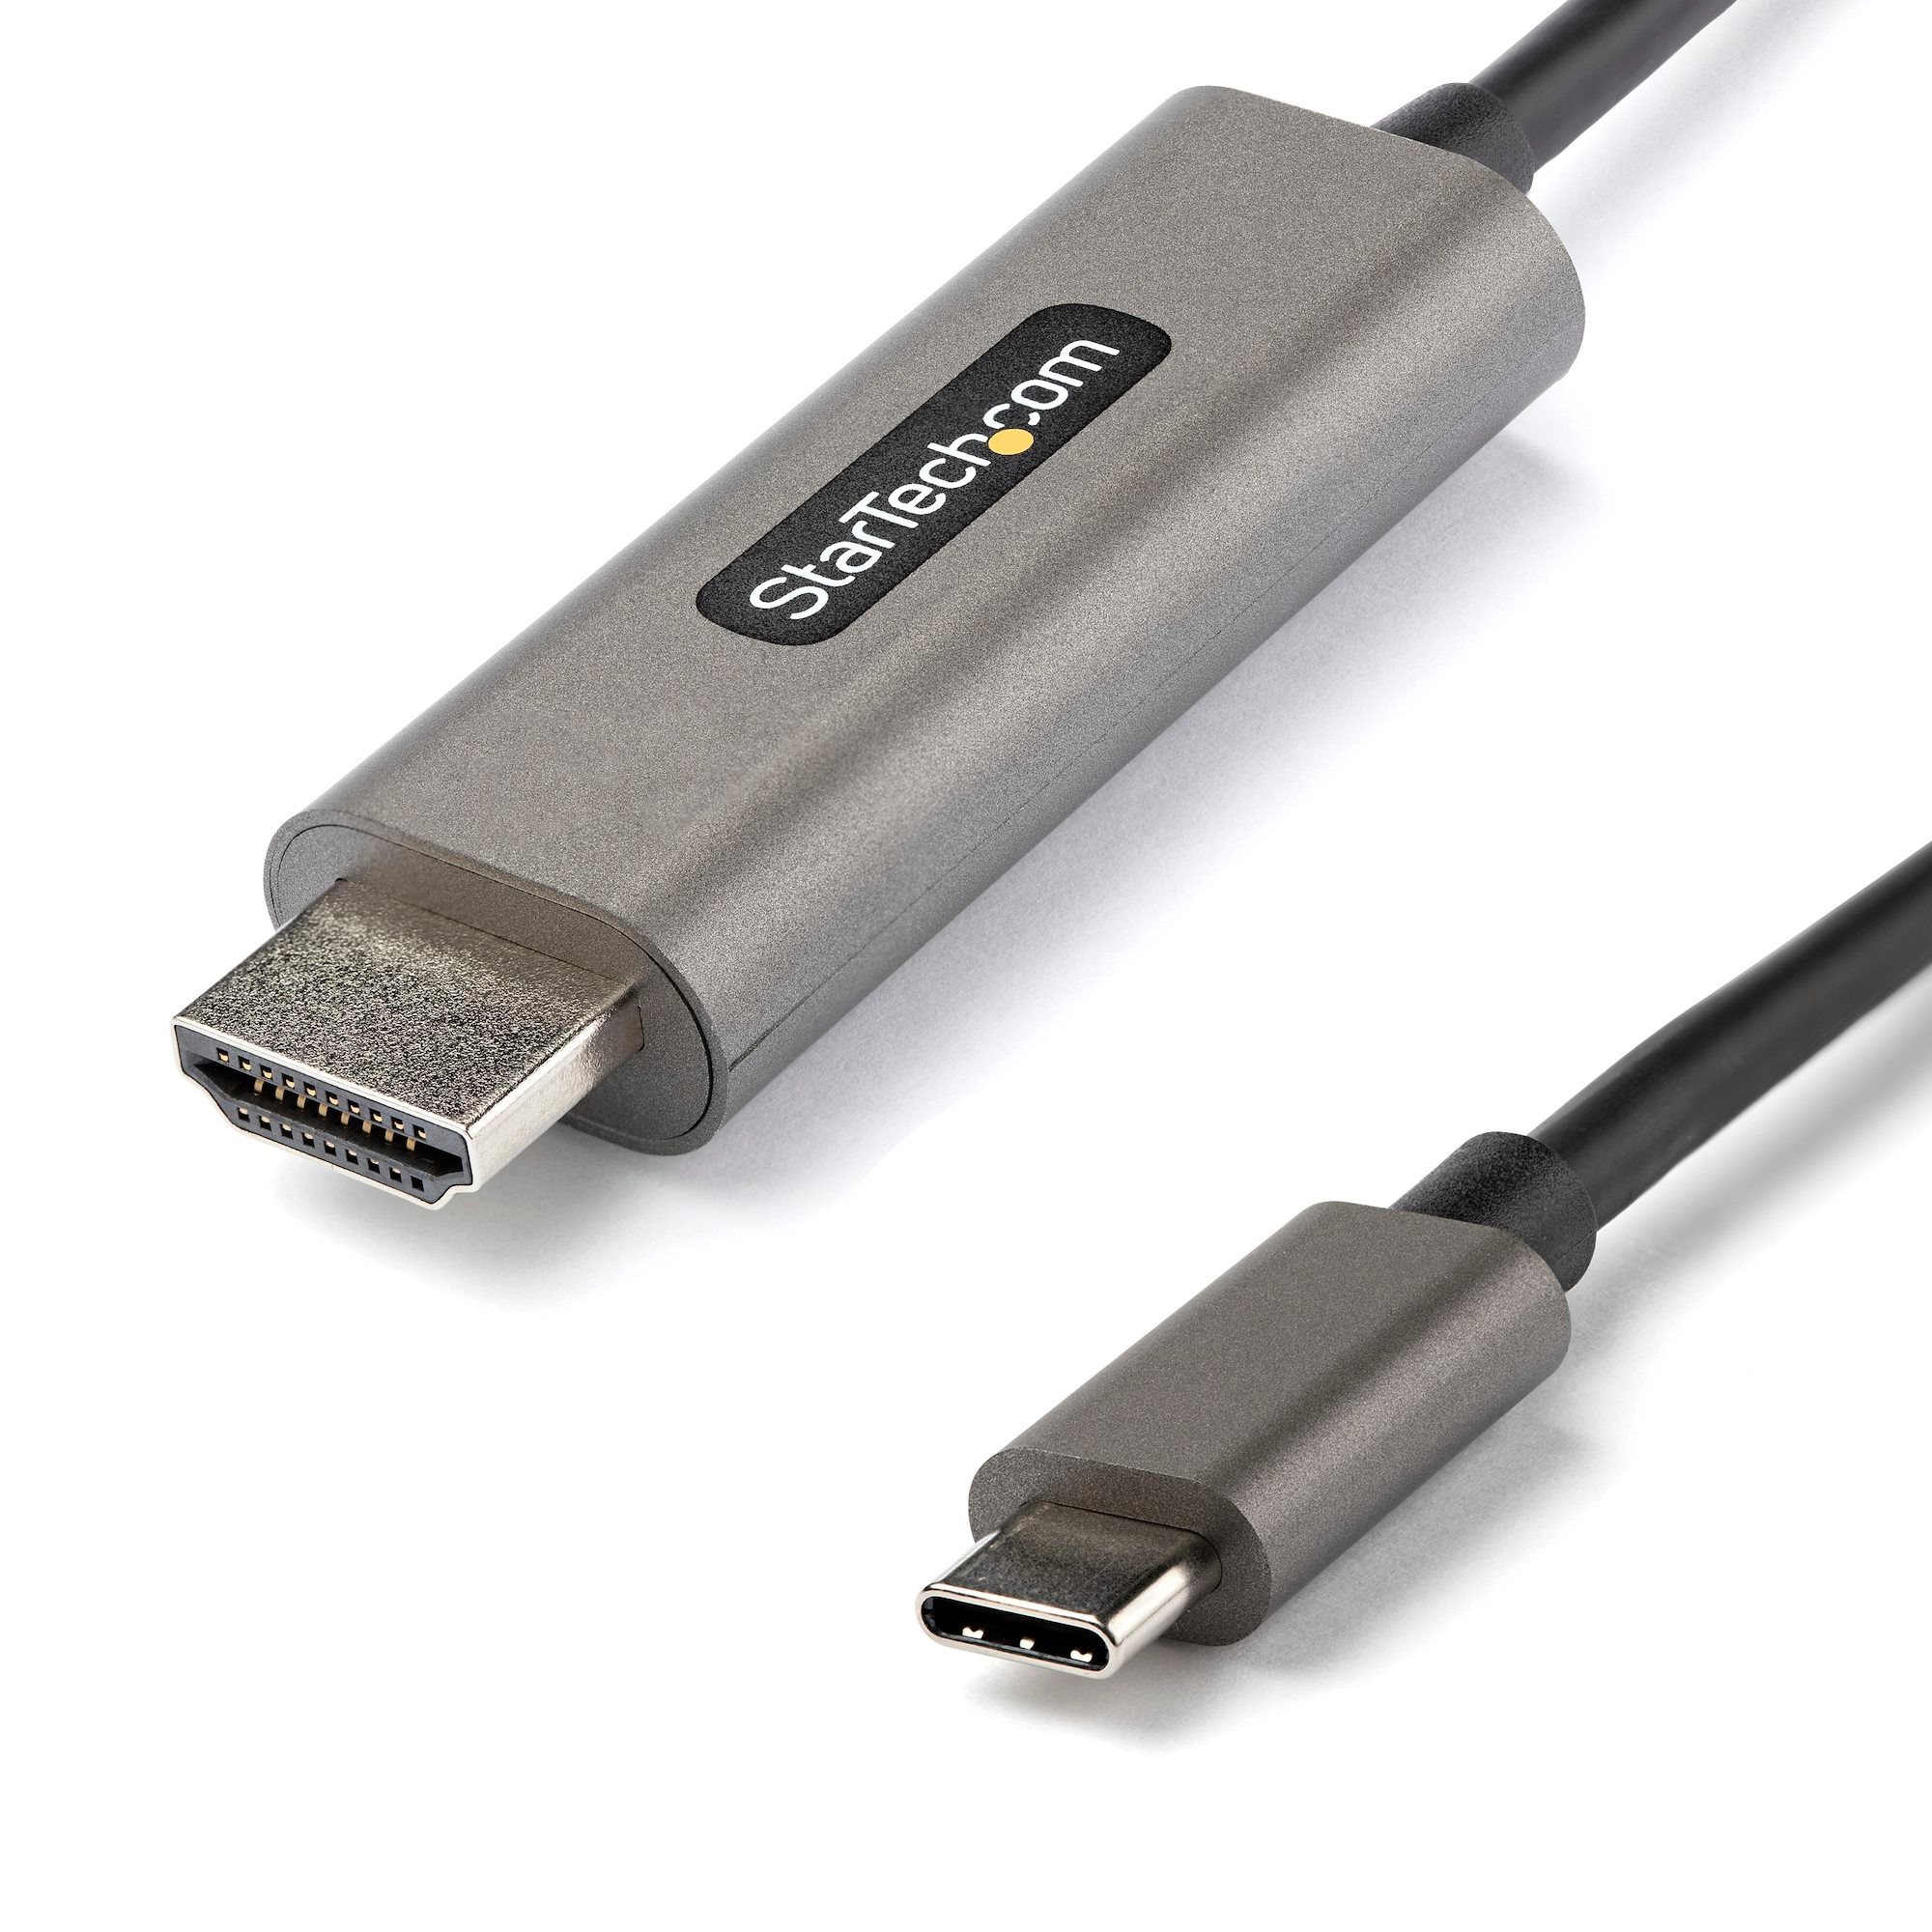 Thunderbolt 3 to Dual HDMI Video Adapter, 4K/60, 4:4:4